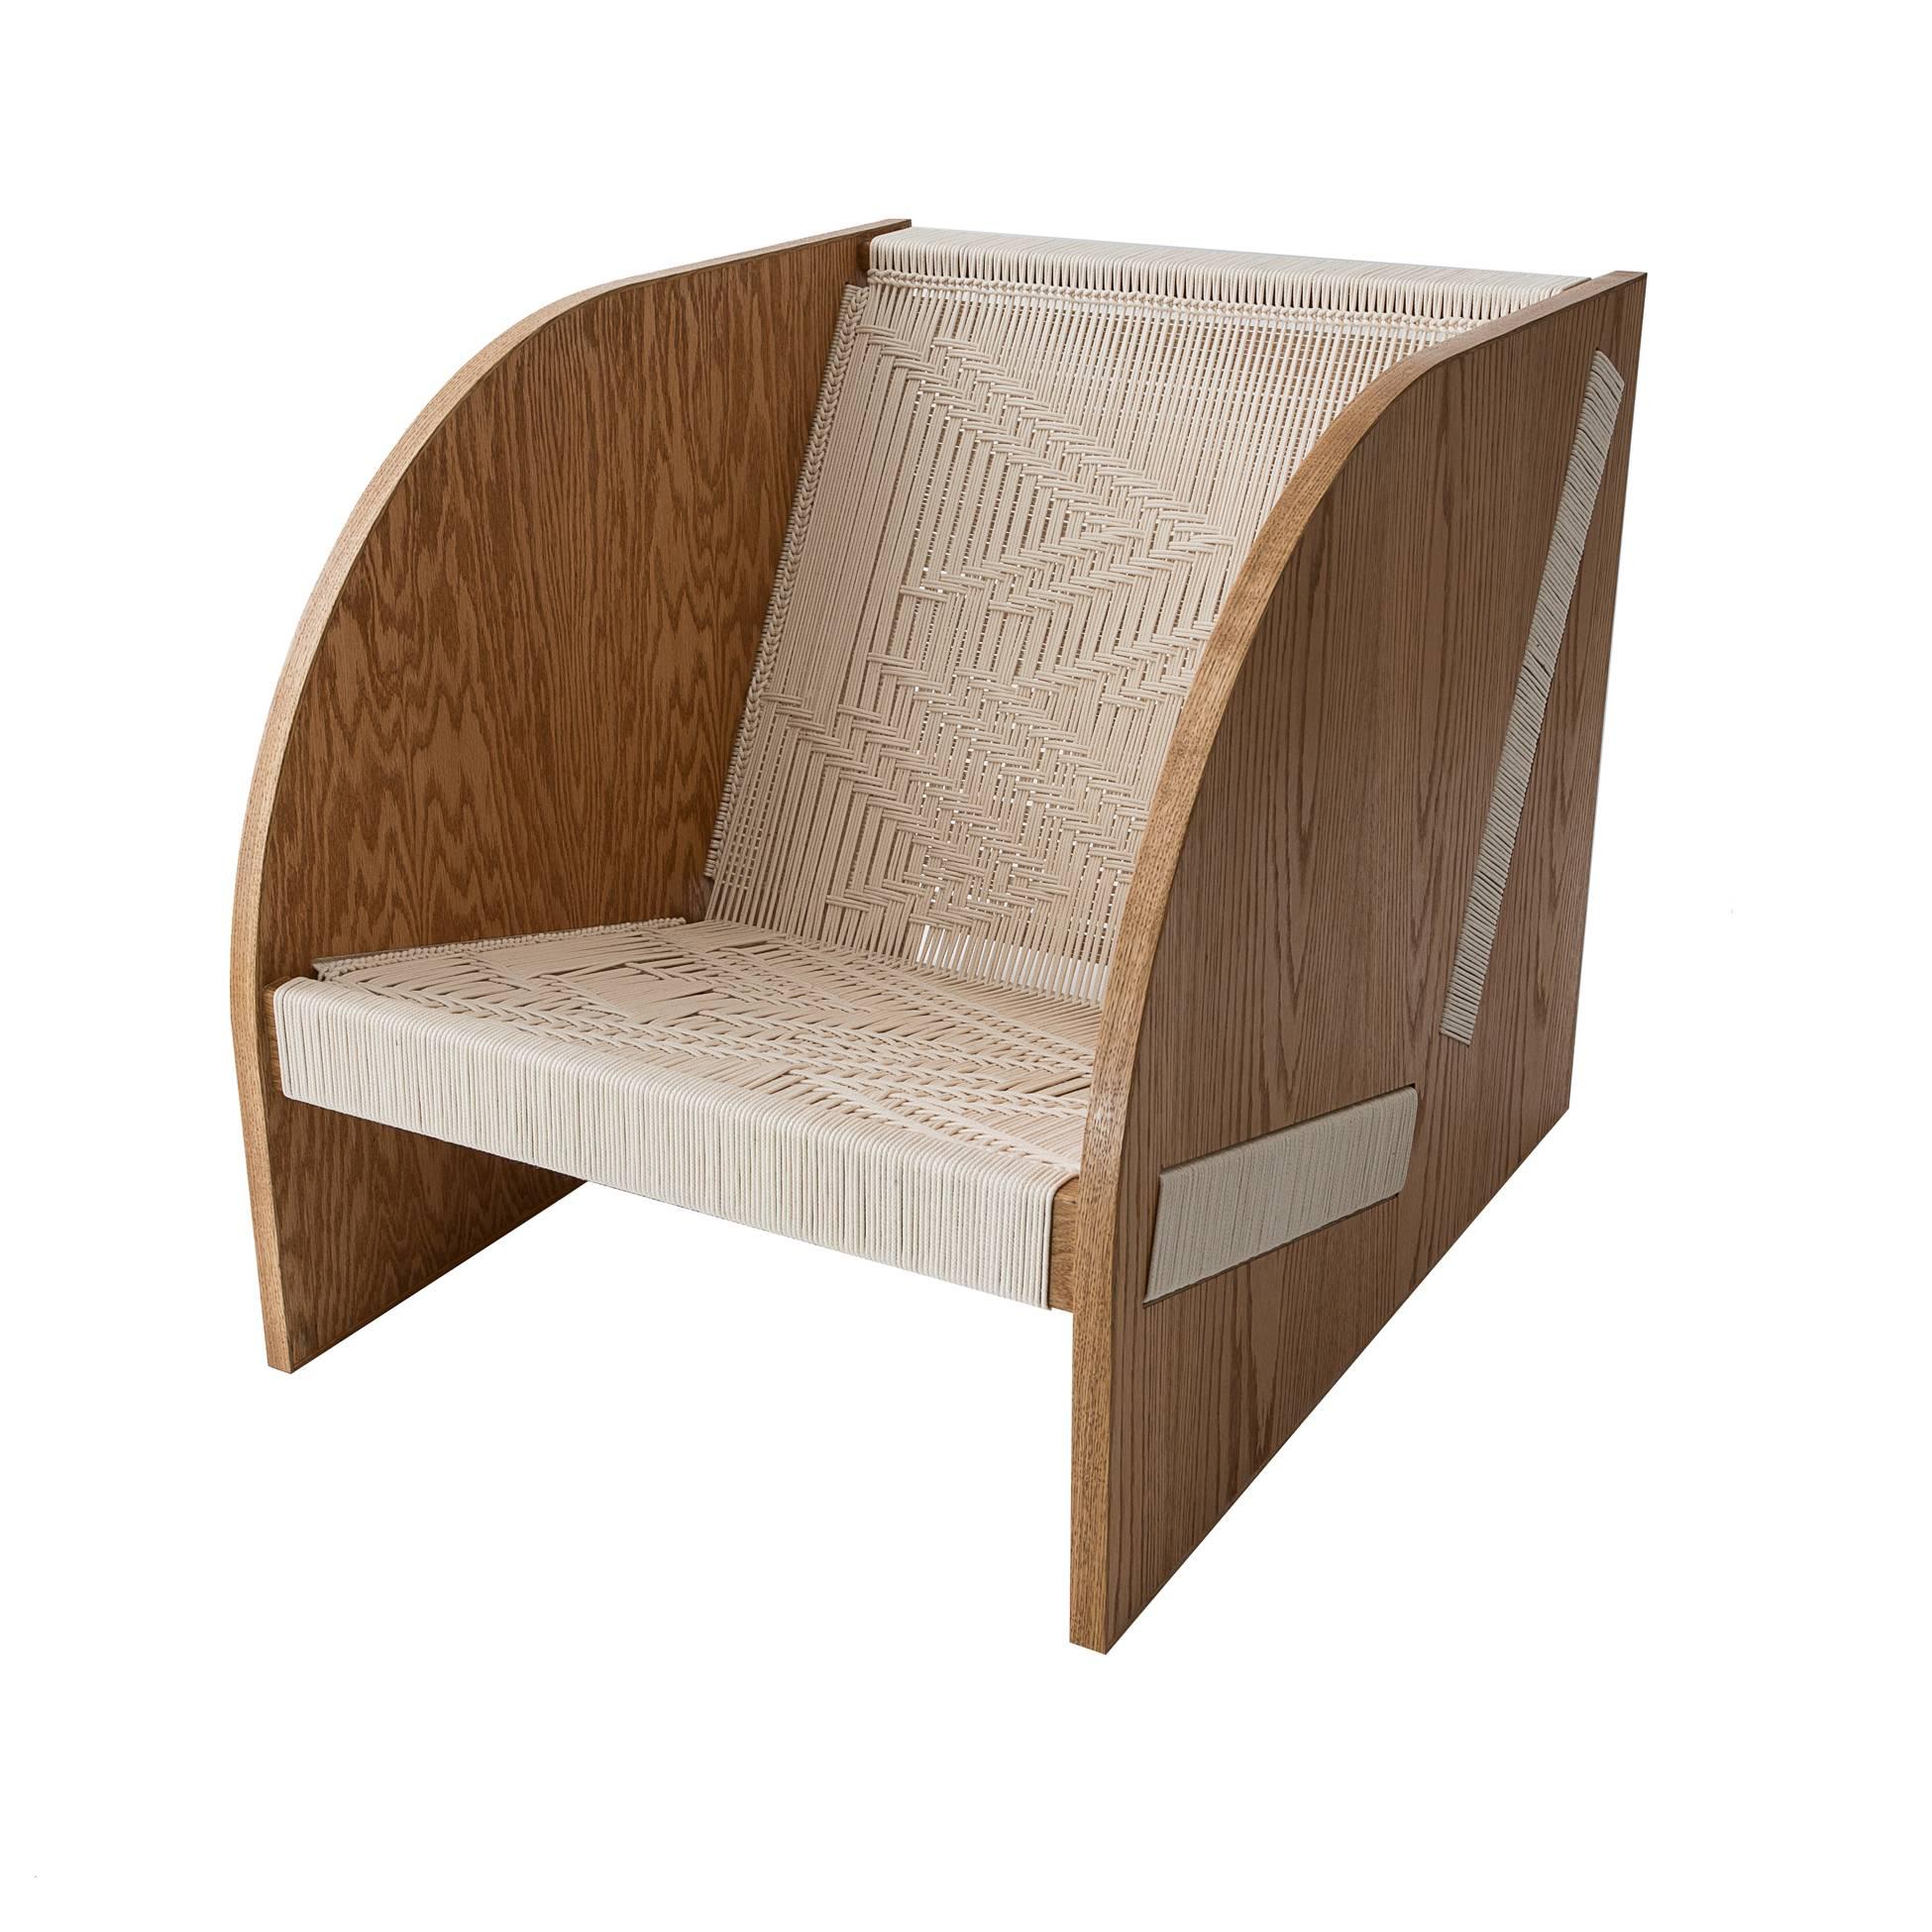 Hand-Woven Peg Woodworking Freya Lounge Chair For Sale